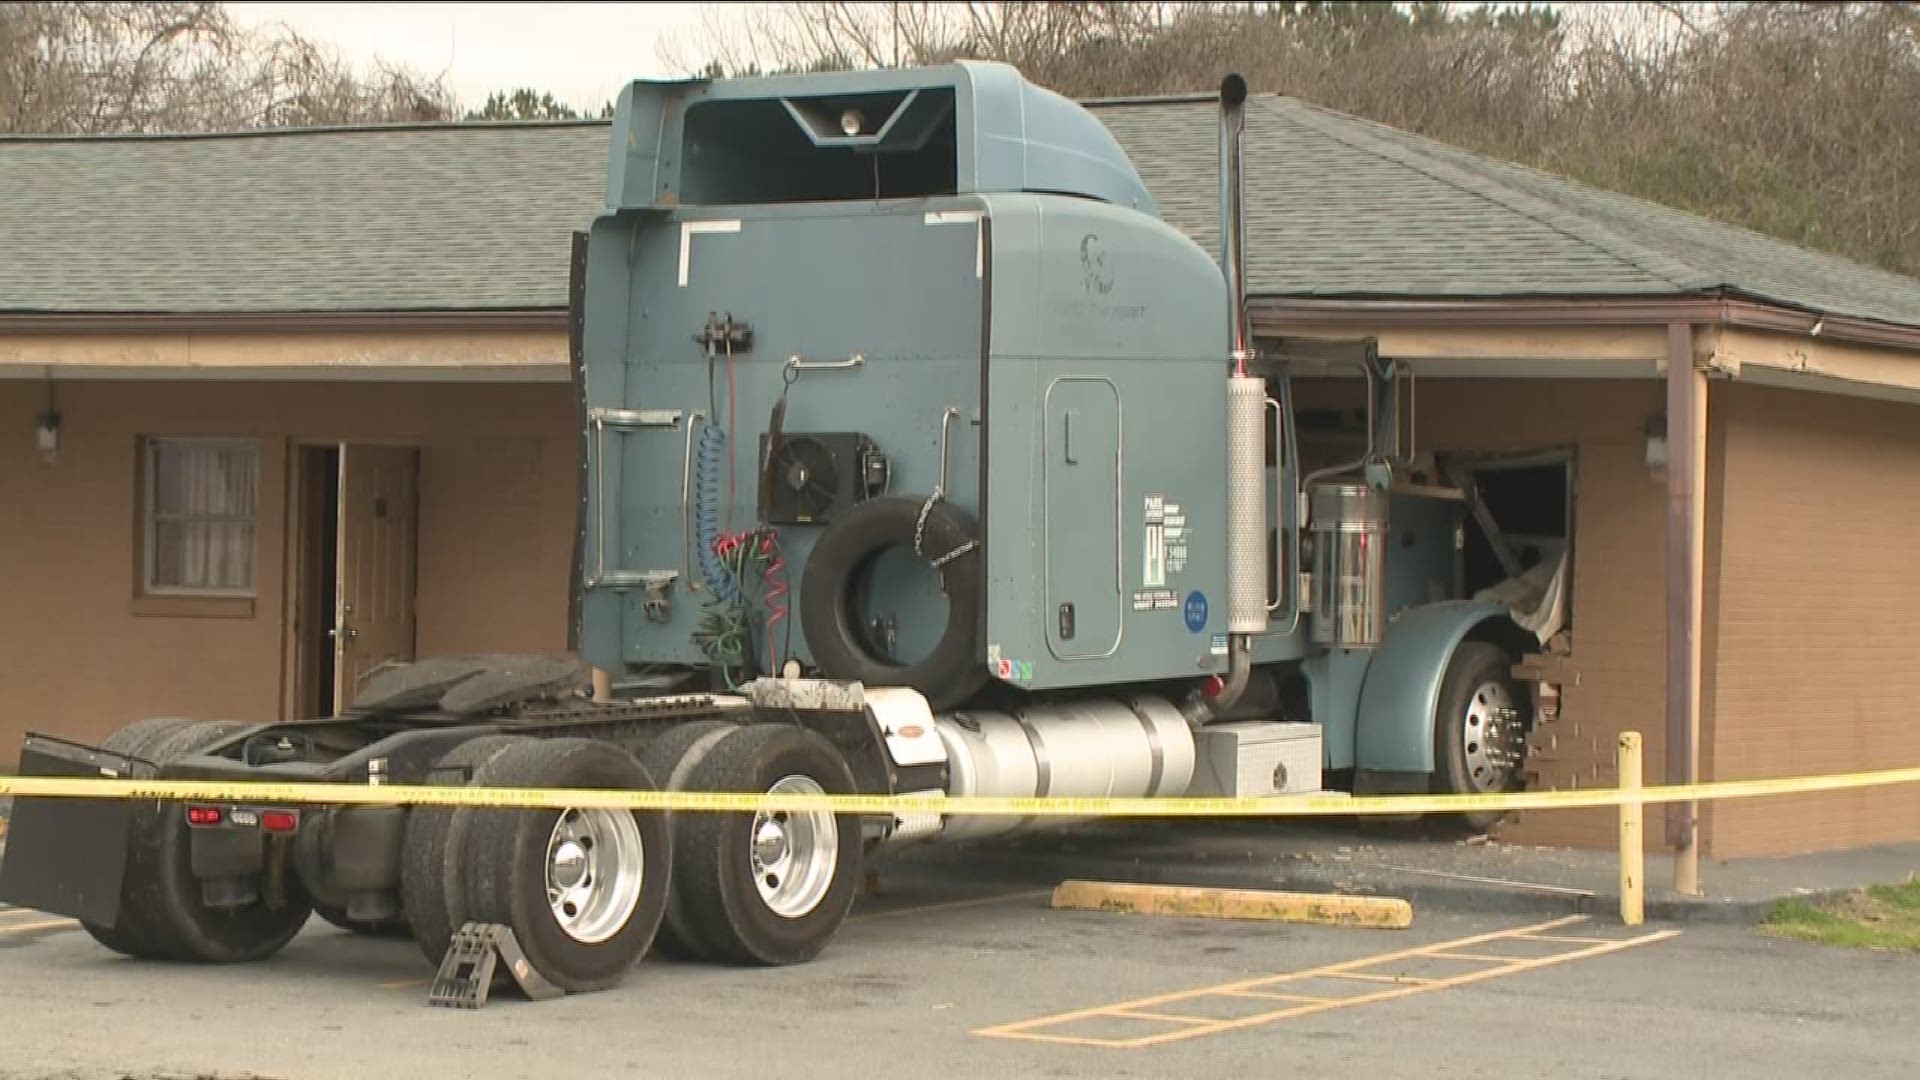 Police said it was after 9 a.m. when officers were dispatched to the accident. When they got there, the found the truck lodged in the side of the motel